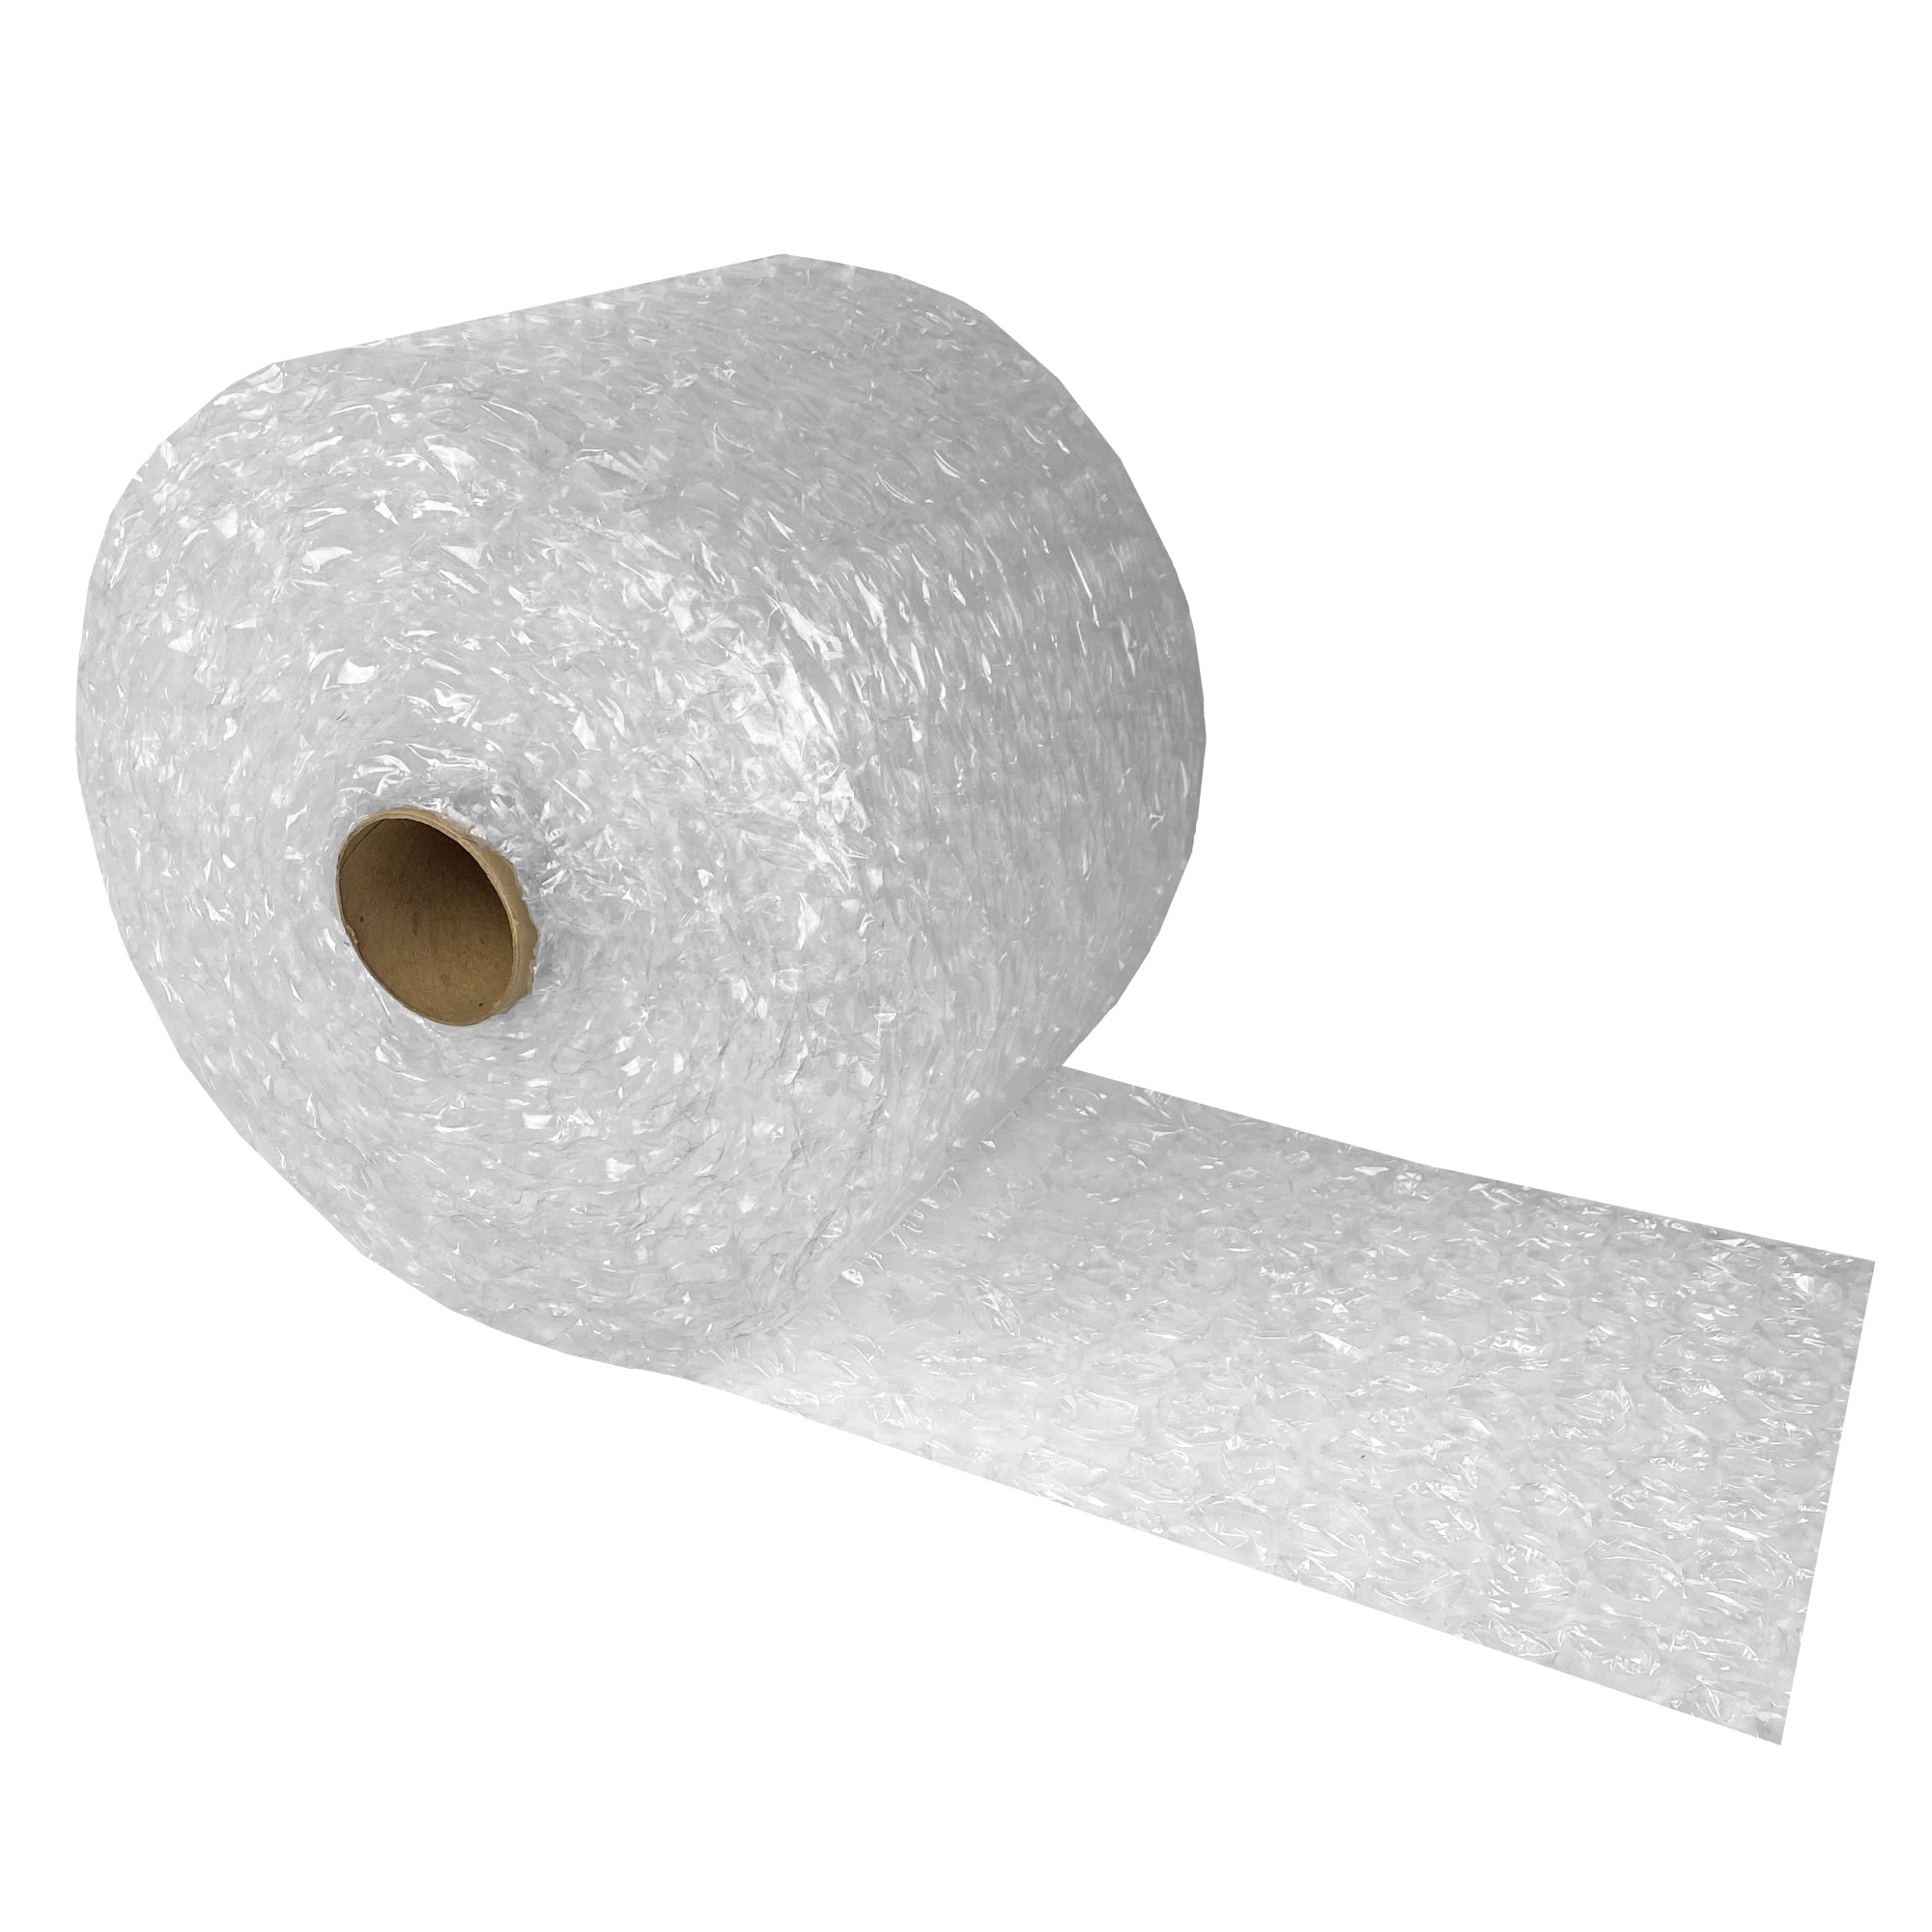 UOFFICE Bubble Cushioning Wrap Roll - 65 ft x 12" Wide - Large 1/2" Bubbles - image 1 of 8